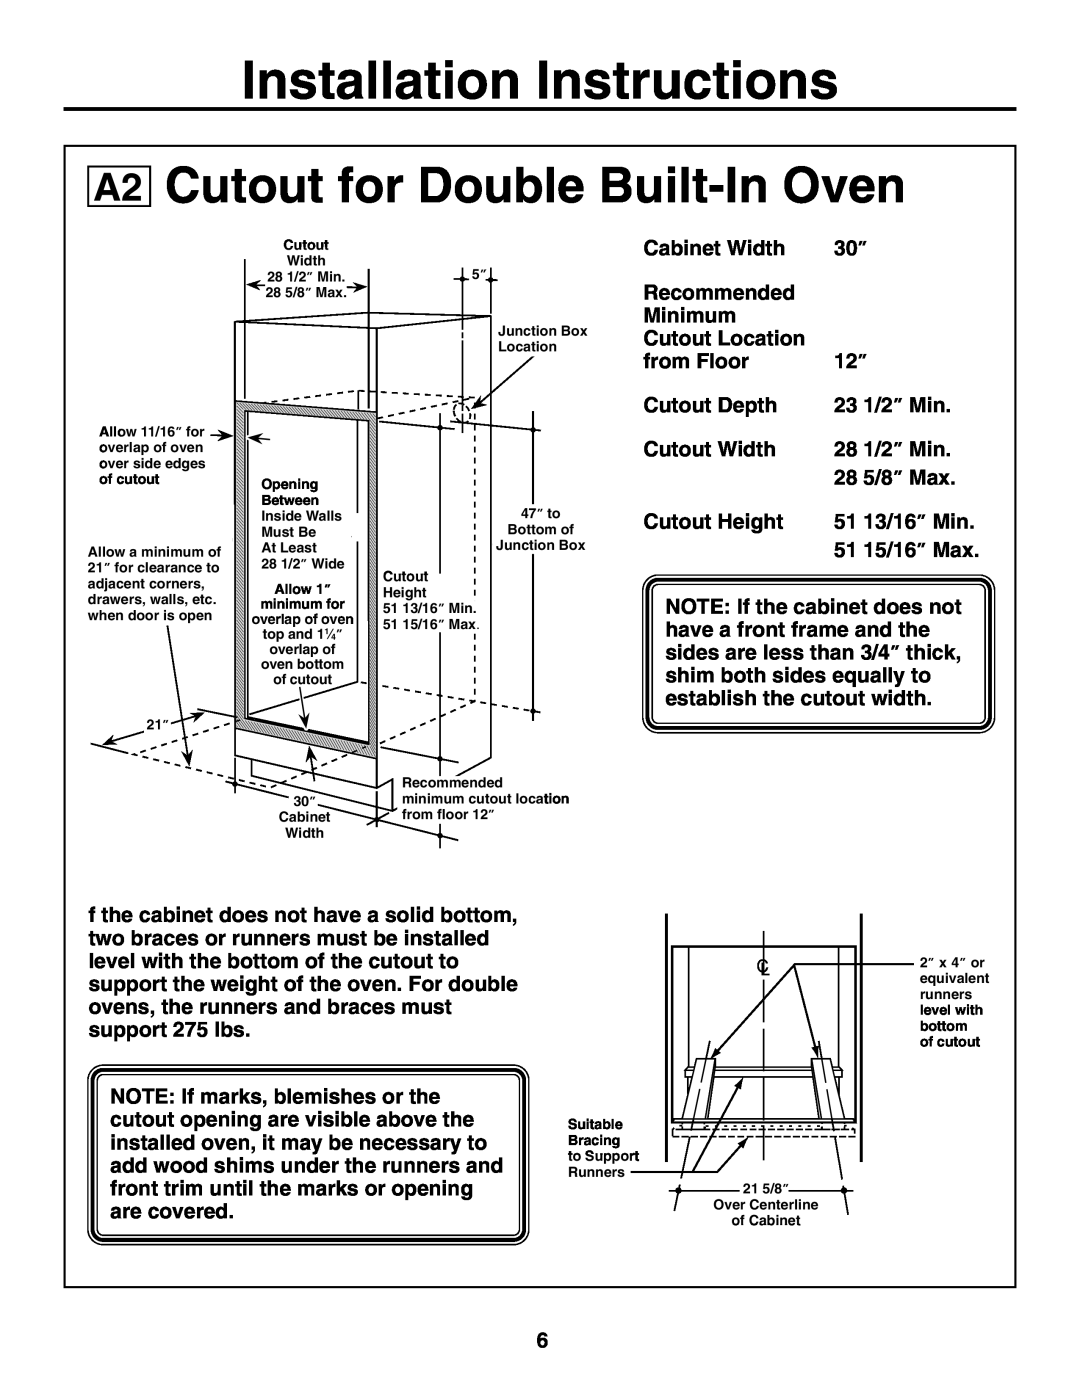 GE JTP20 installation instructions Cutout for Double Built-In Oven, Installation Instructions 